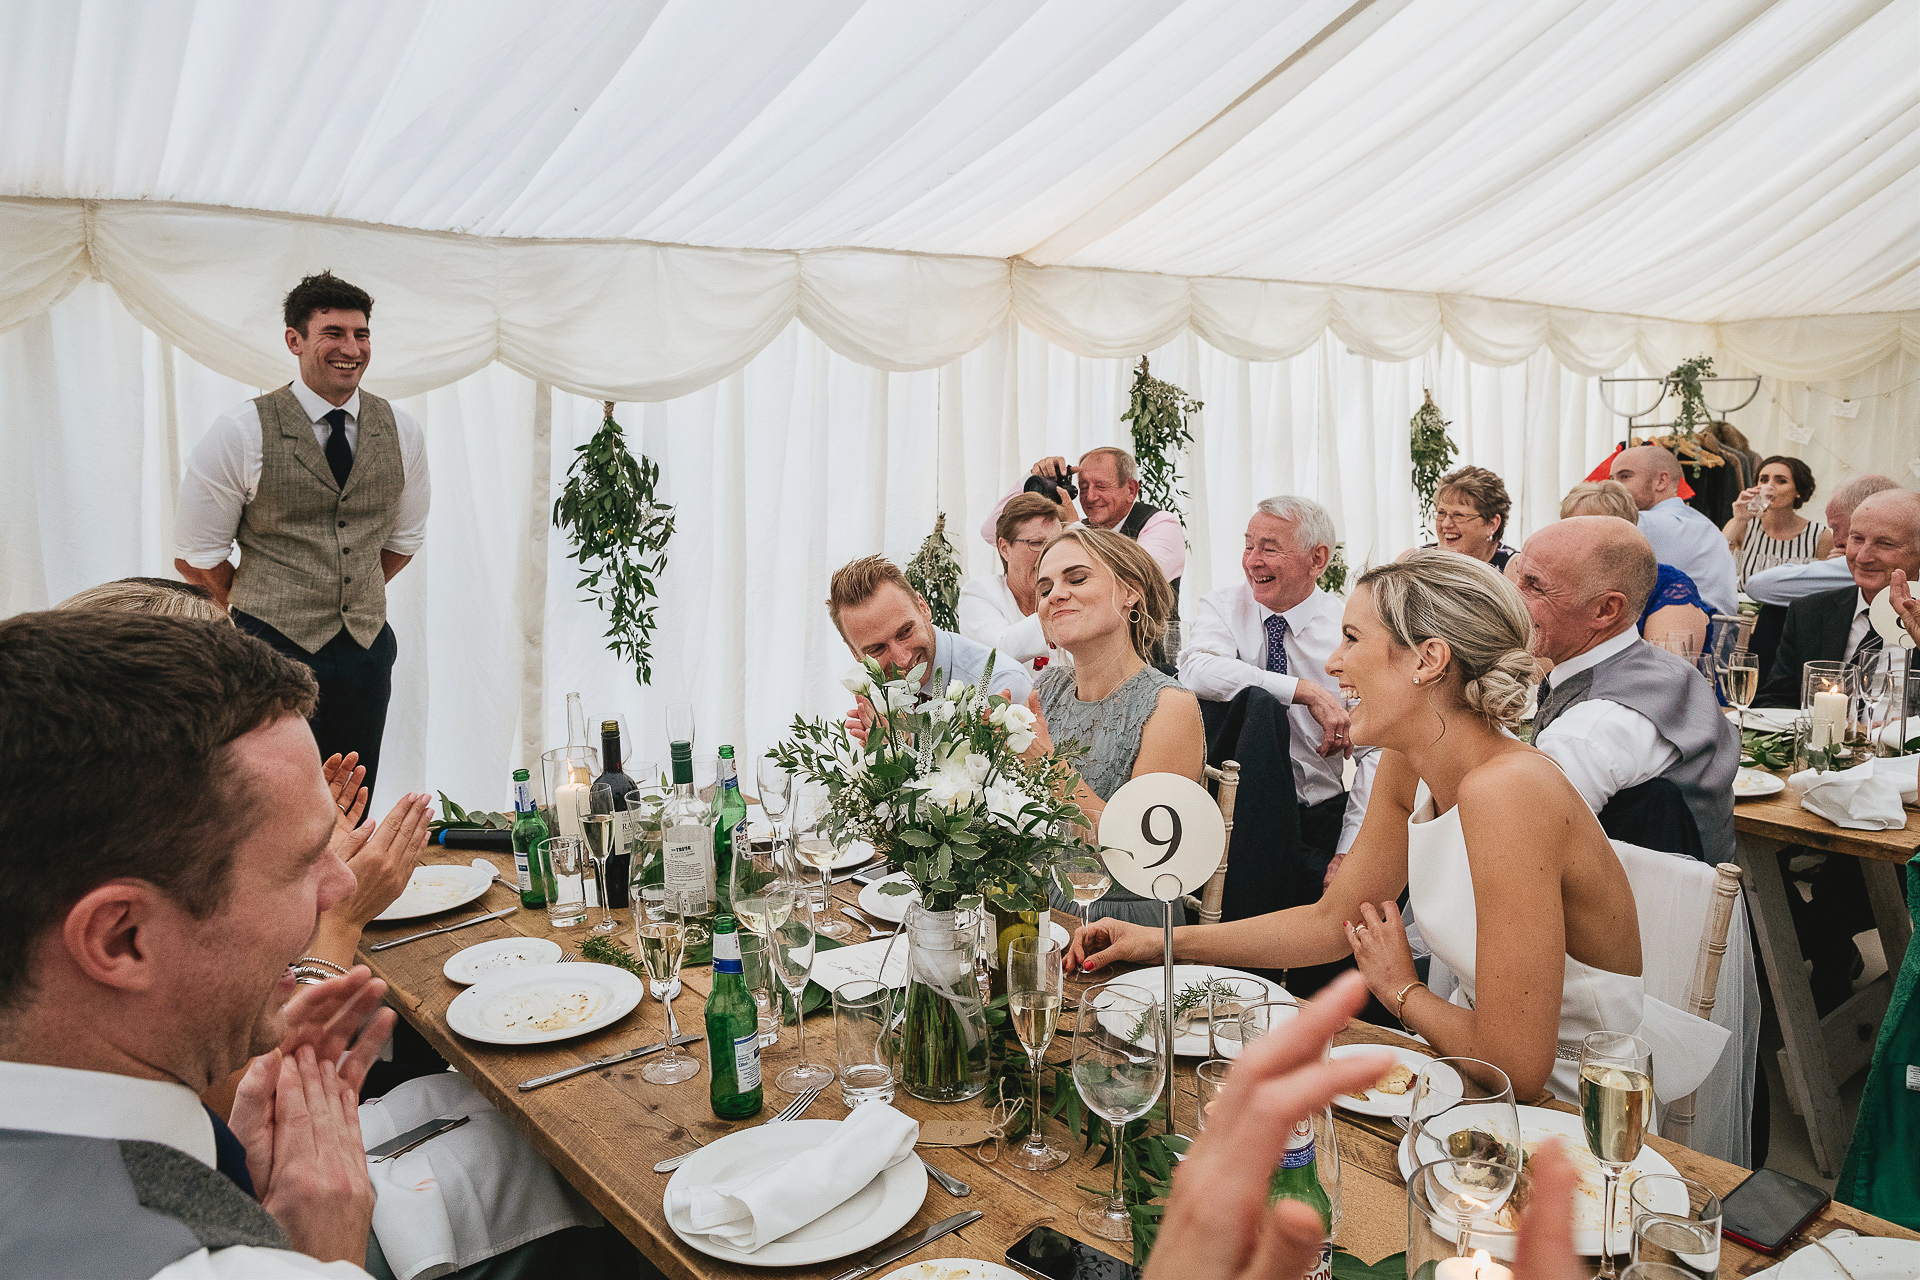 Bride and groom laughing together during speeches in a marquee